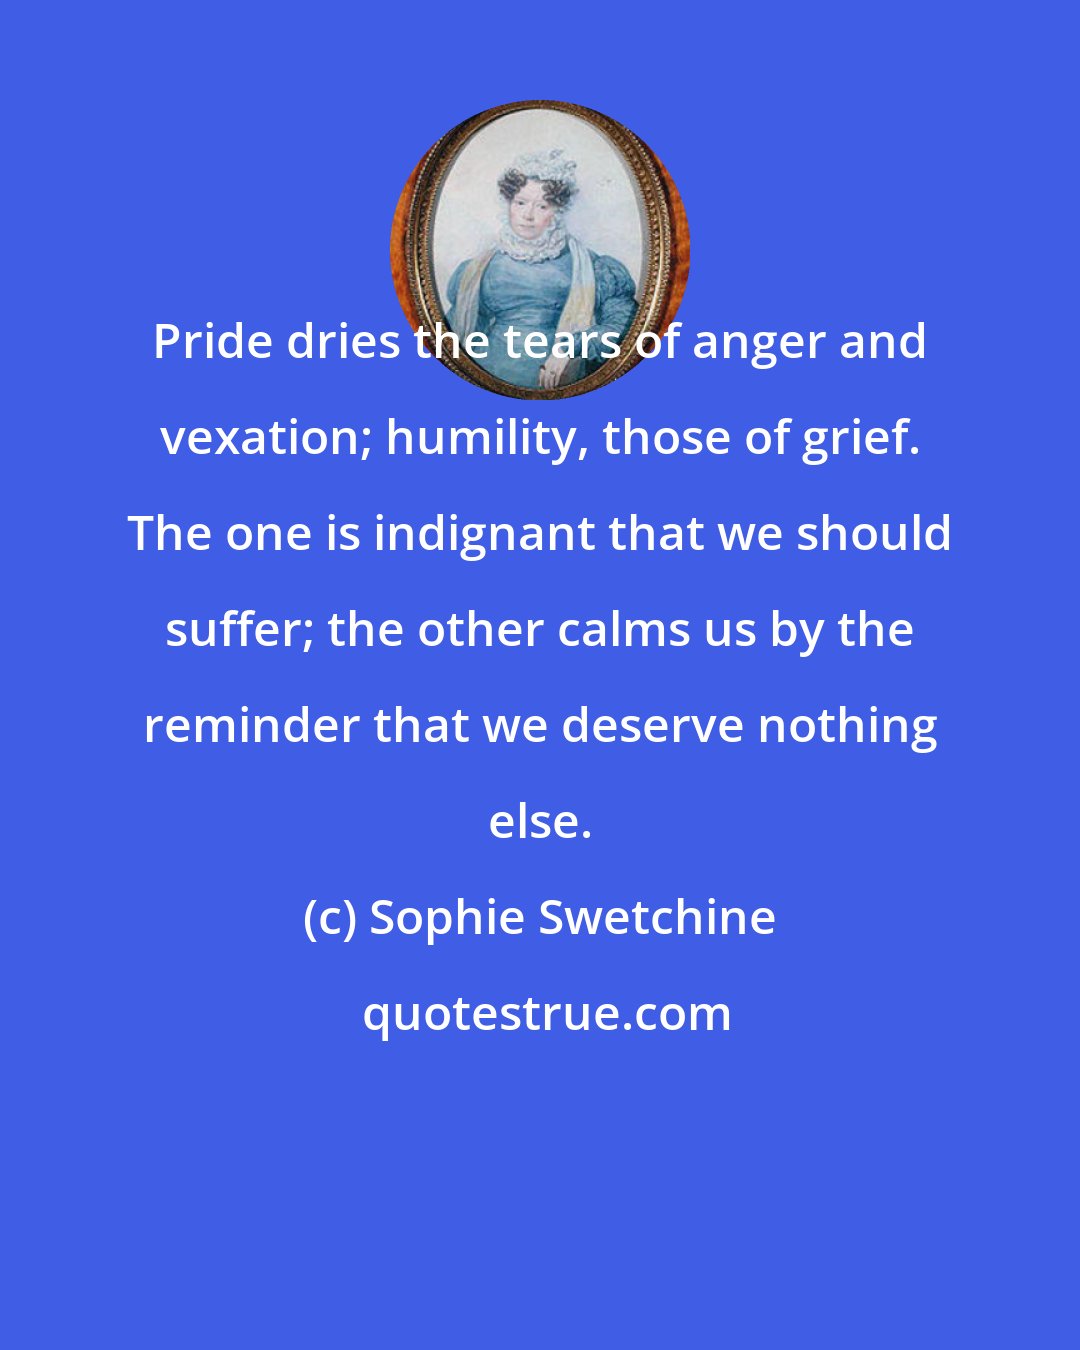 Sophie Swetchine: Pride dries the tears of anger and vexation; humility, those of grief. The one is indignant that we should suffer; the other calms us by the reminder that we deserve nothing else.